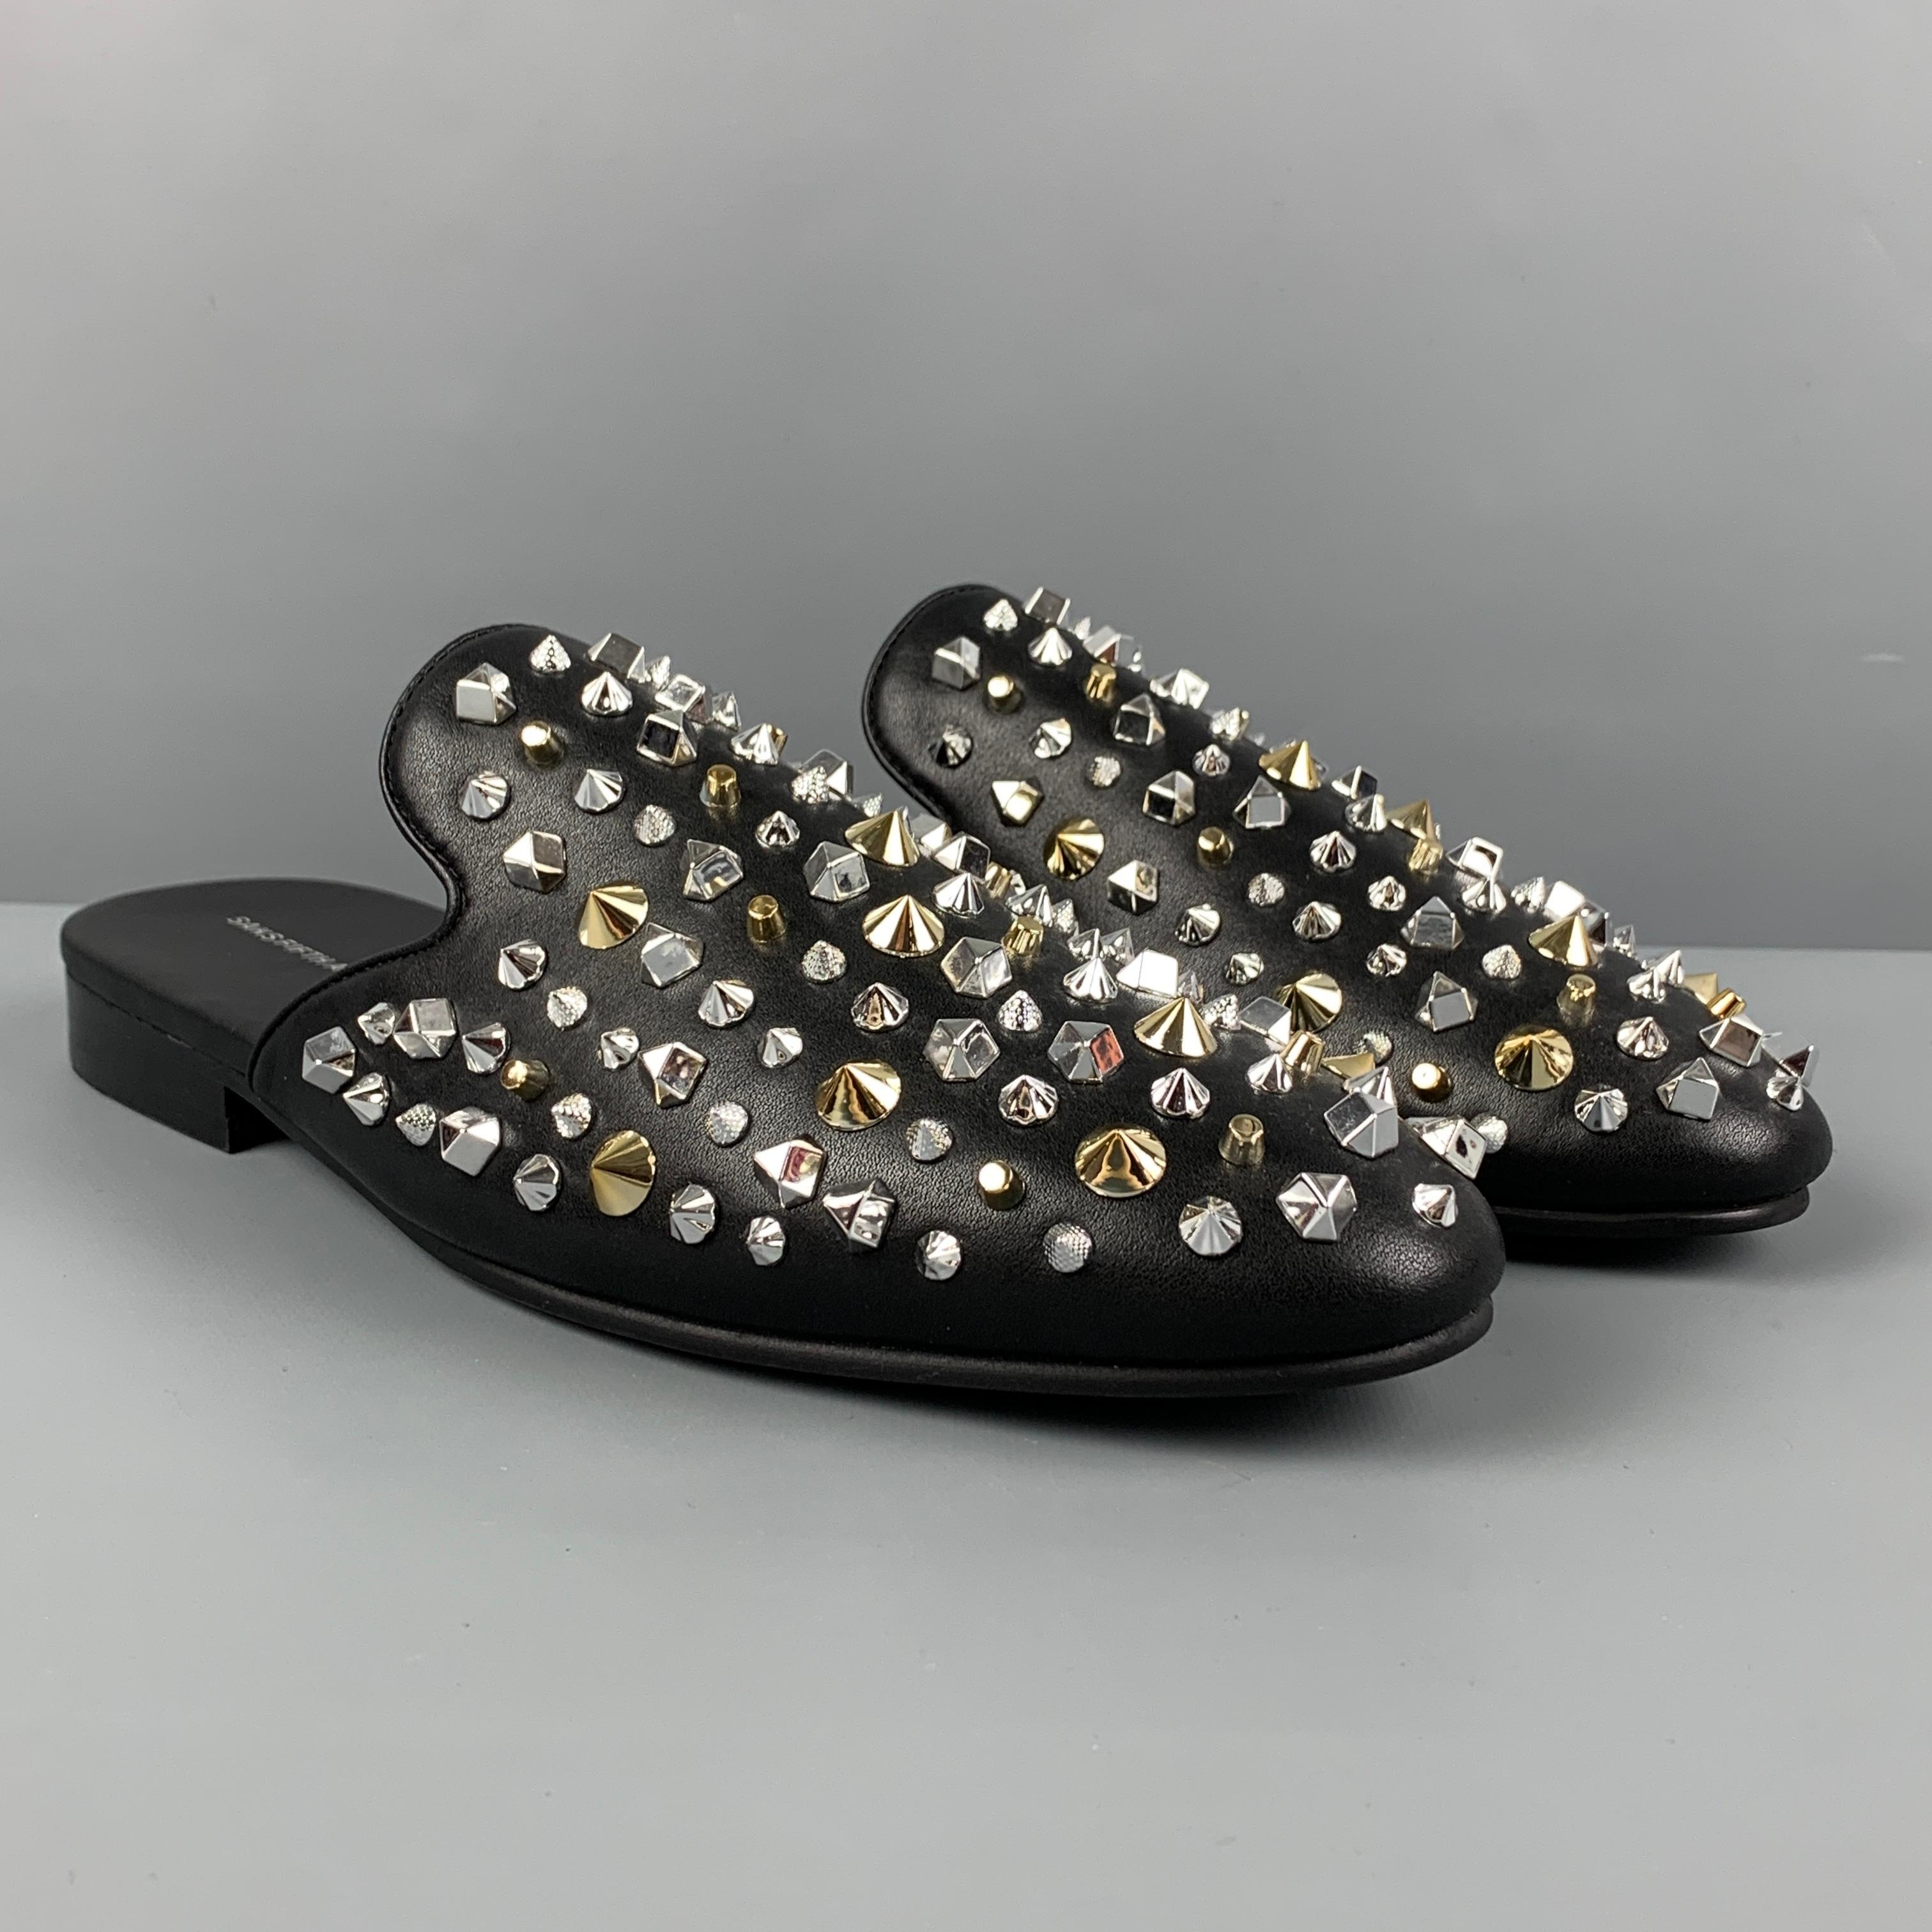 SAKS FIFTH AVENUE mules comes in a black leather featuring a rumi studded design and a slip one style. 

Excellent Pre-Owned Condition.
Marked: 12 M

Outsole: 12 in. x 3.75 in. 